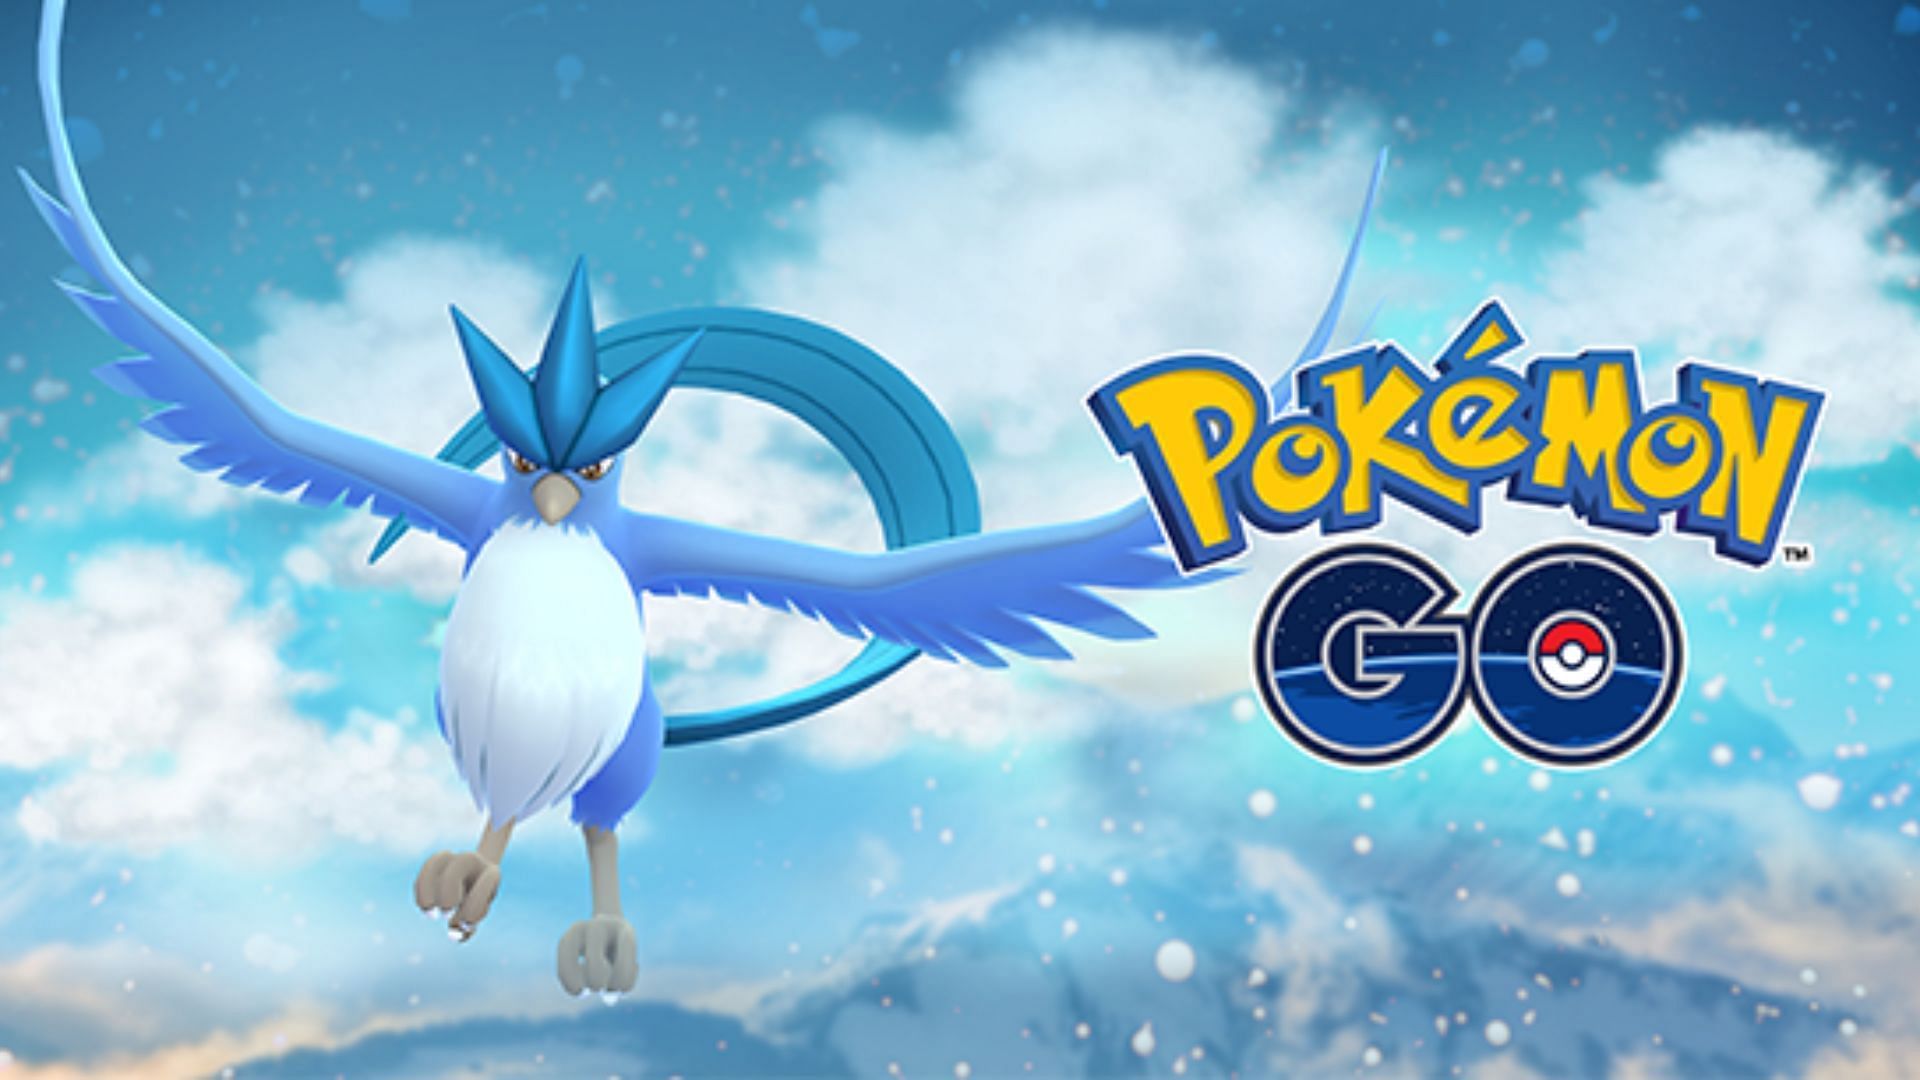 Poké Daxi on X: Shadow Shiny Articuno will be available in June 2023! June  10th (10am) - June 11th (8pm) June 17th (10am) - June 18th (8pm) June 24th  (10am) - June